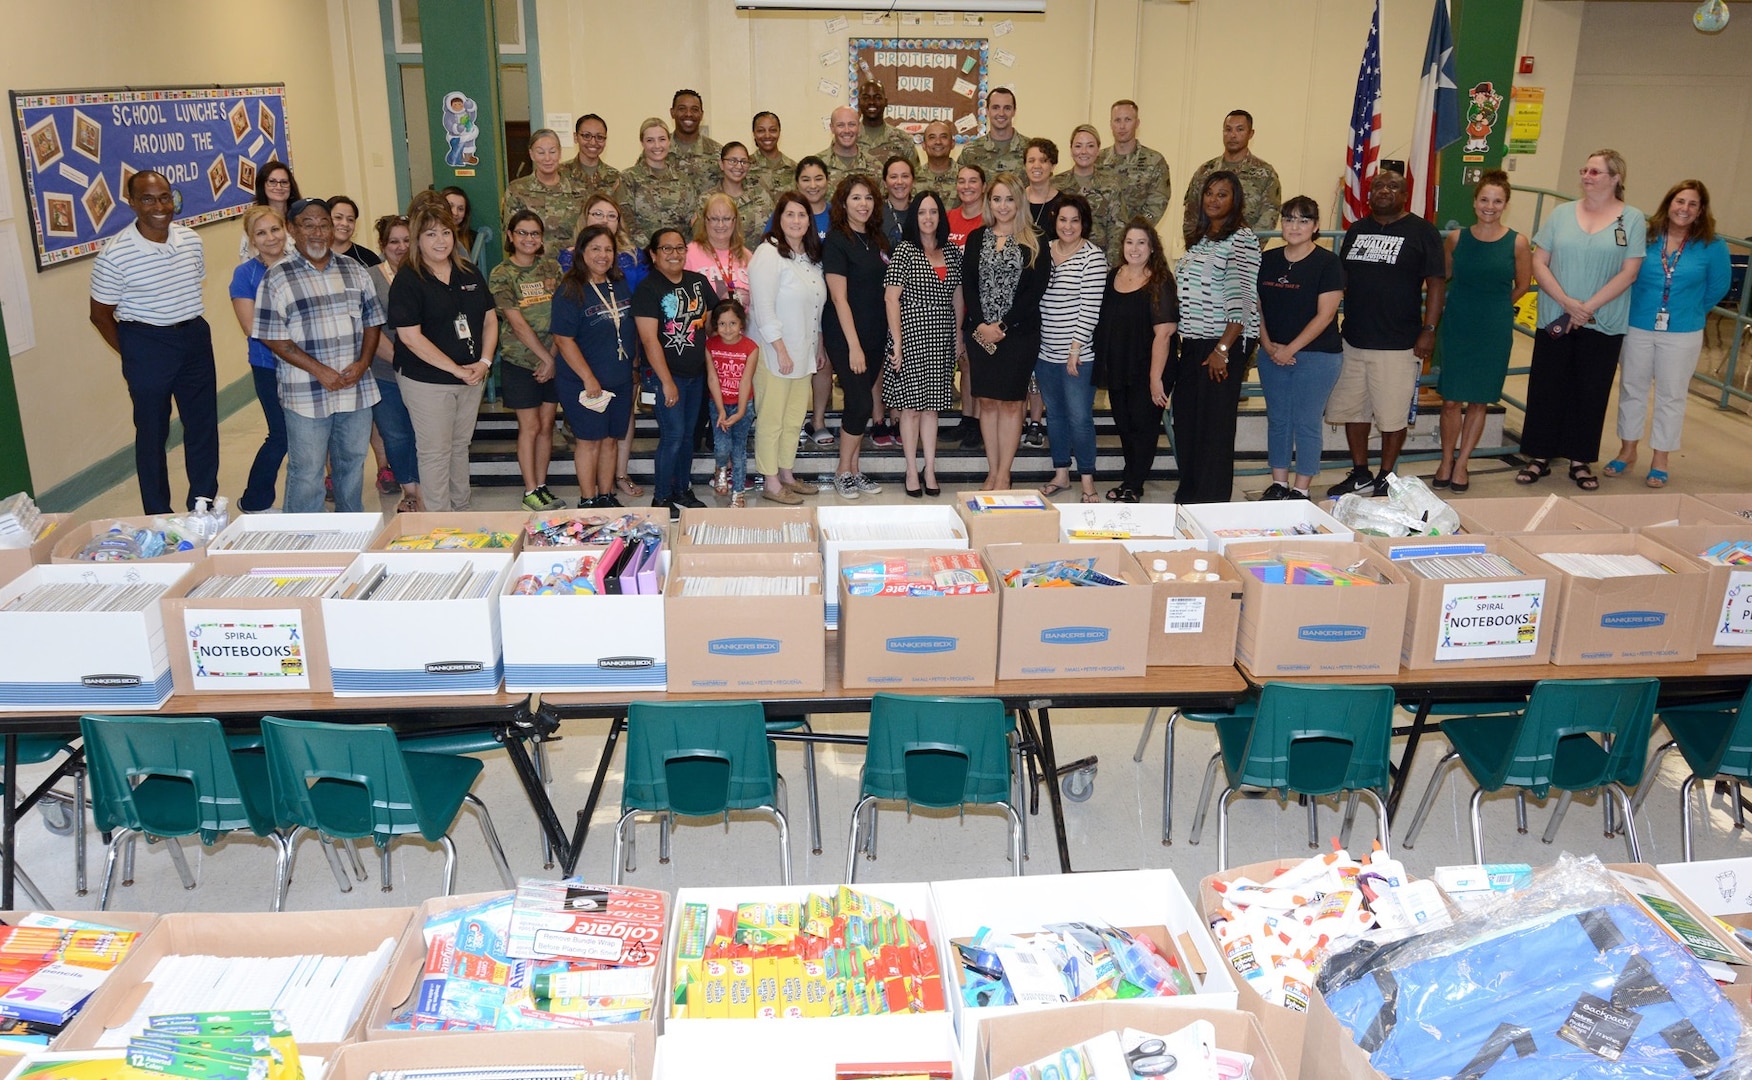 Briscoe Elementary School staff and Soldiers from the 187th Medical Battalion pose in front of more than $10,000 worth of donated school supplies Aug. 8.